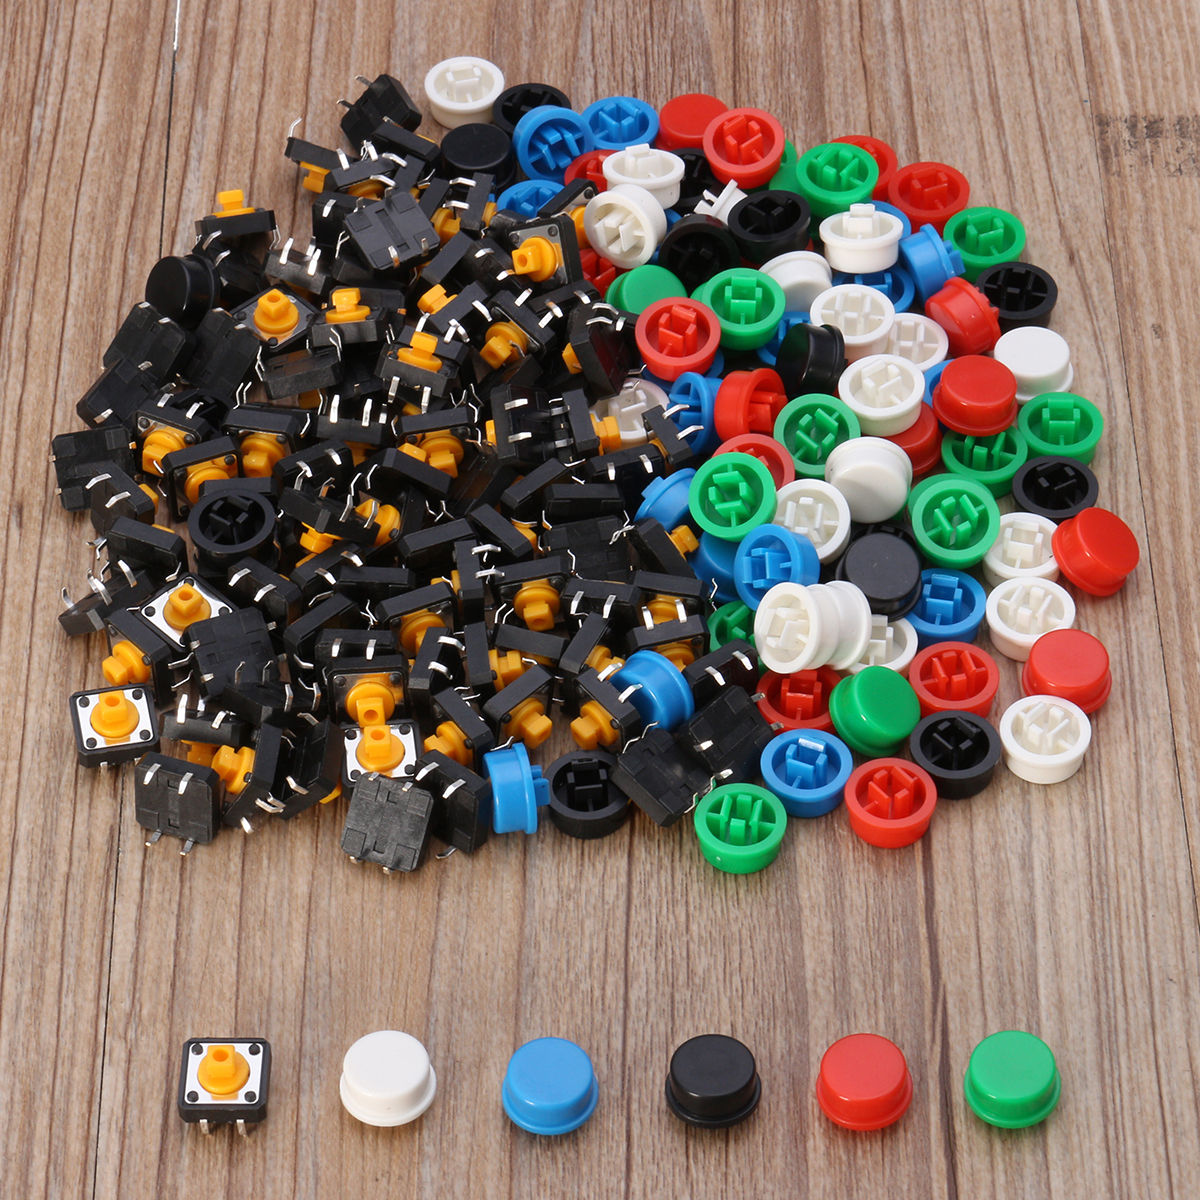 100pcs Plastic Tactile Switch PCB Tact Push Button Momentary Switch 4 Pins + 5 Color Button Cap 12*12*7.3mm Mayitr